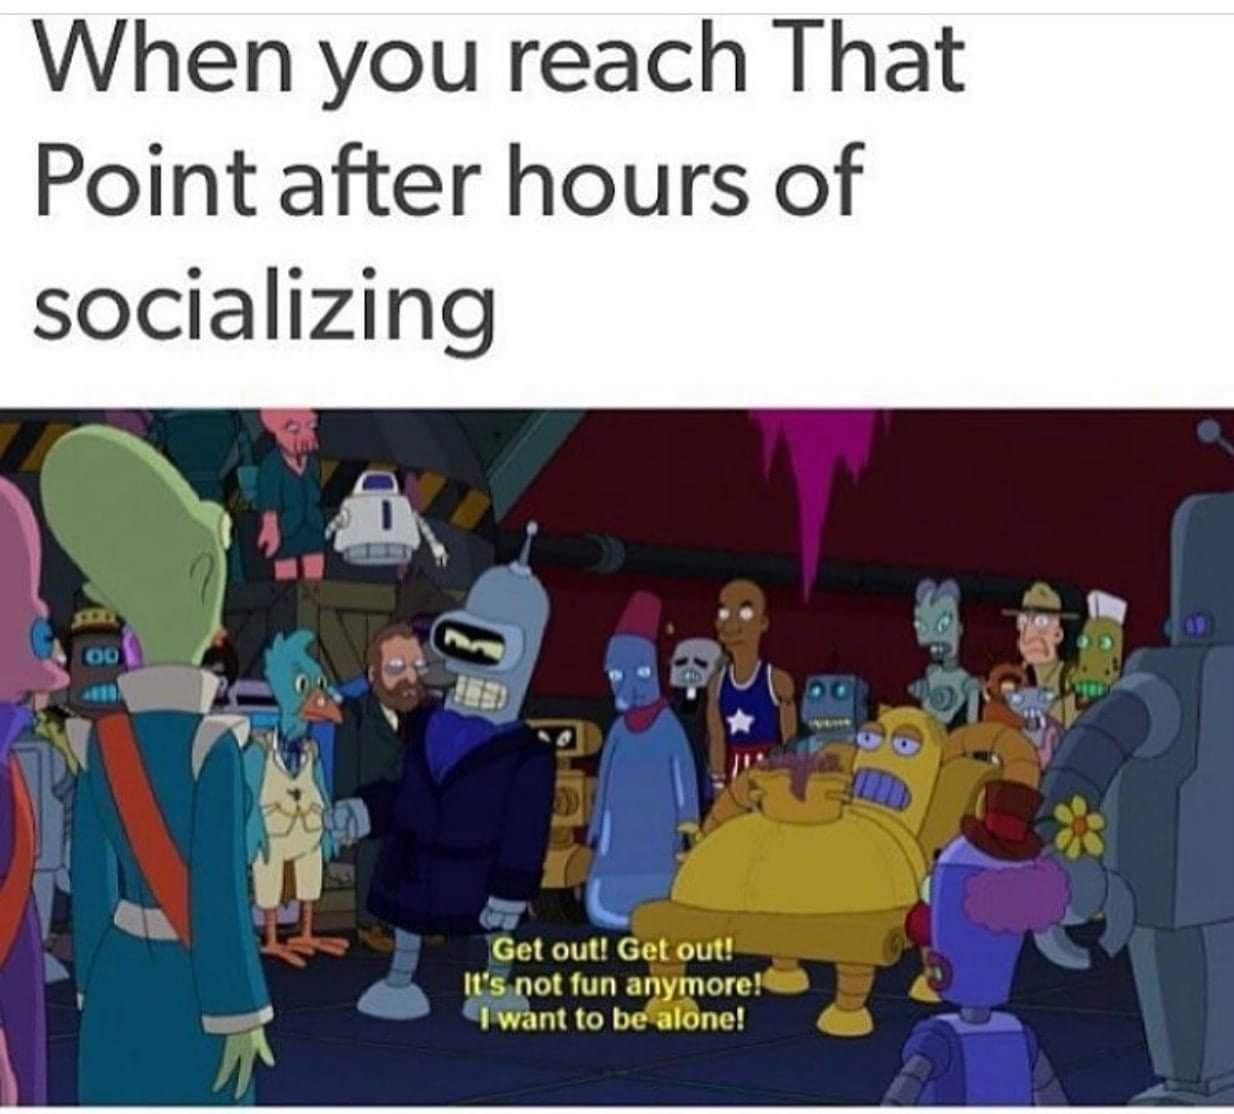 loner memes - When you reach That Point after hours of socializing more 00 Get out! Get out! It's not fun anymore! I want to be alone!